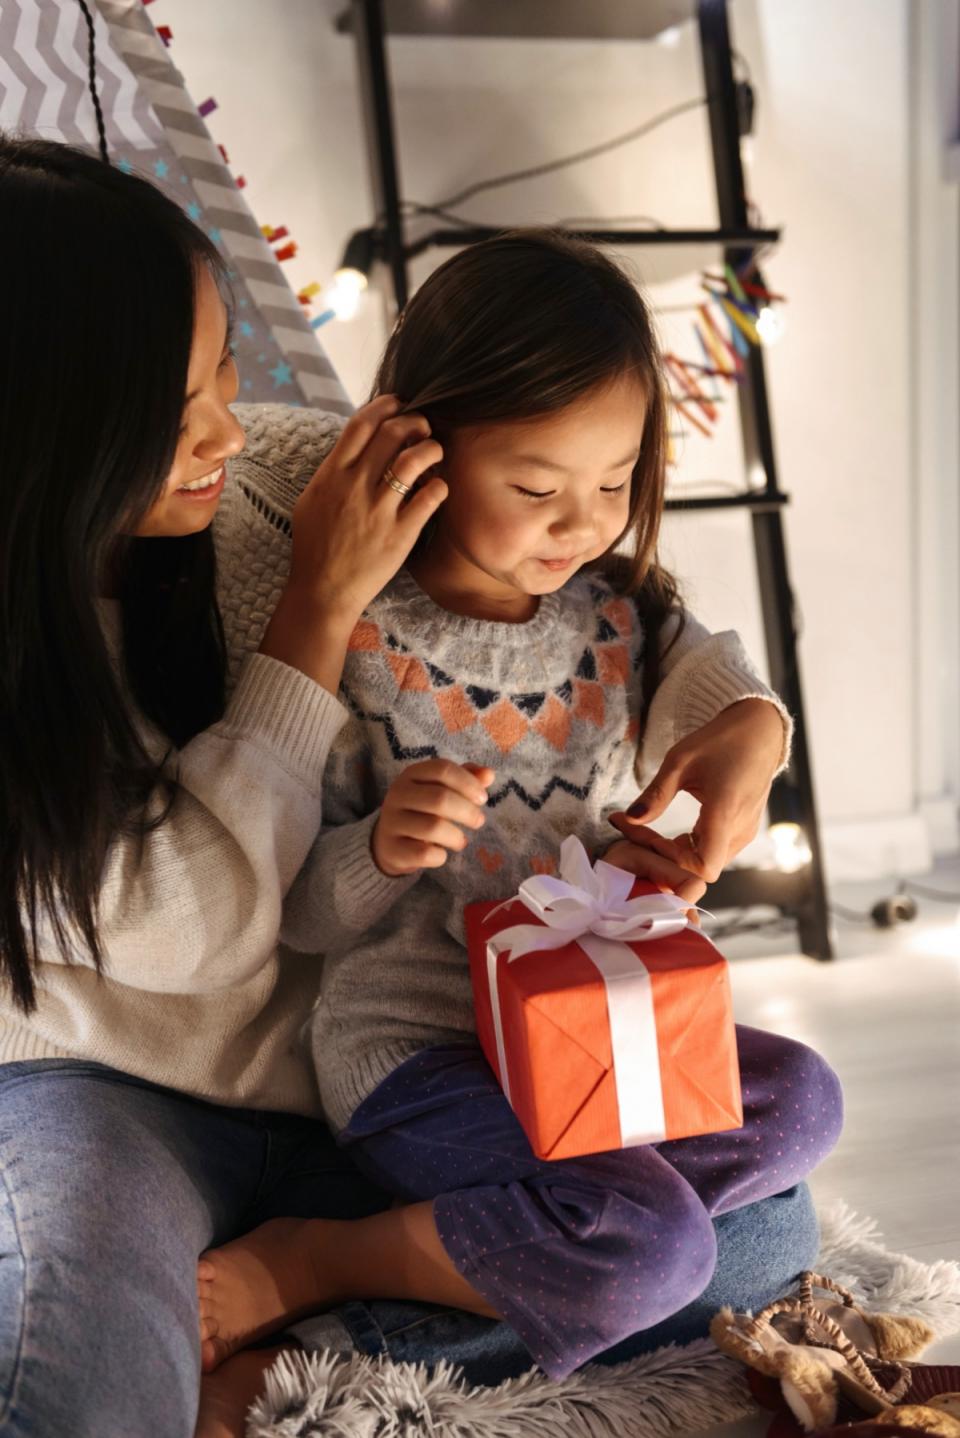 A young girl sits in her mothers lap as she receives a holiday gift.